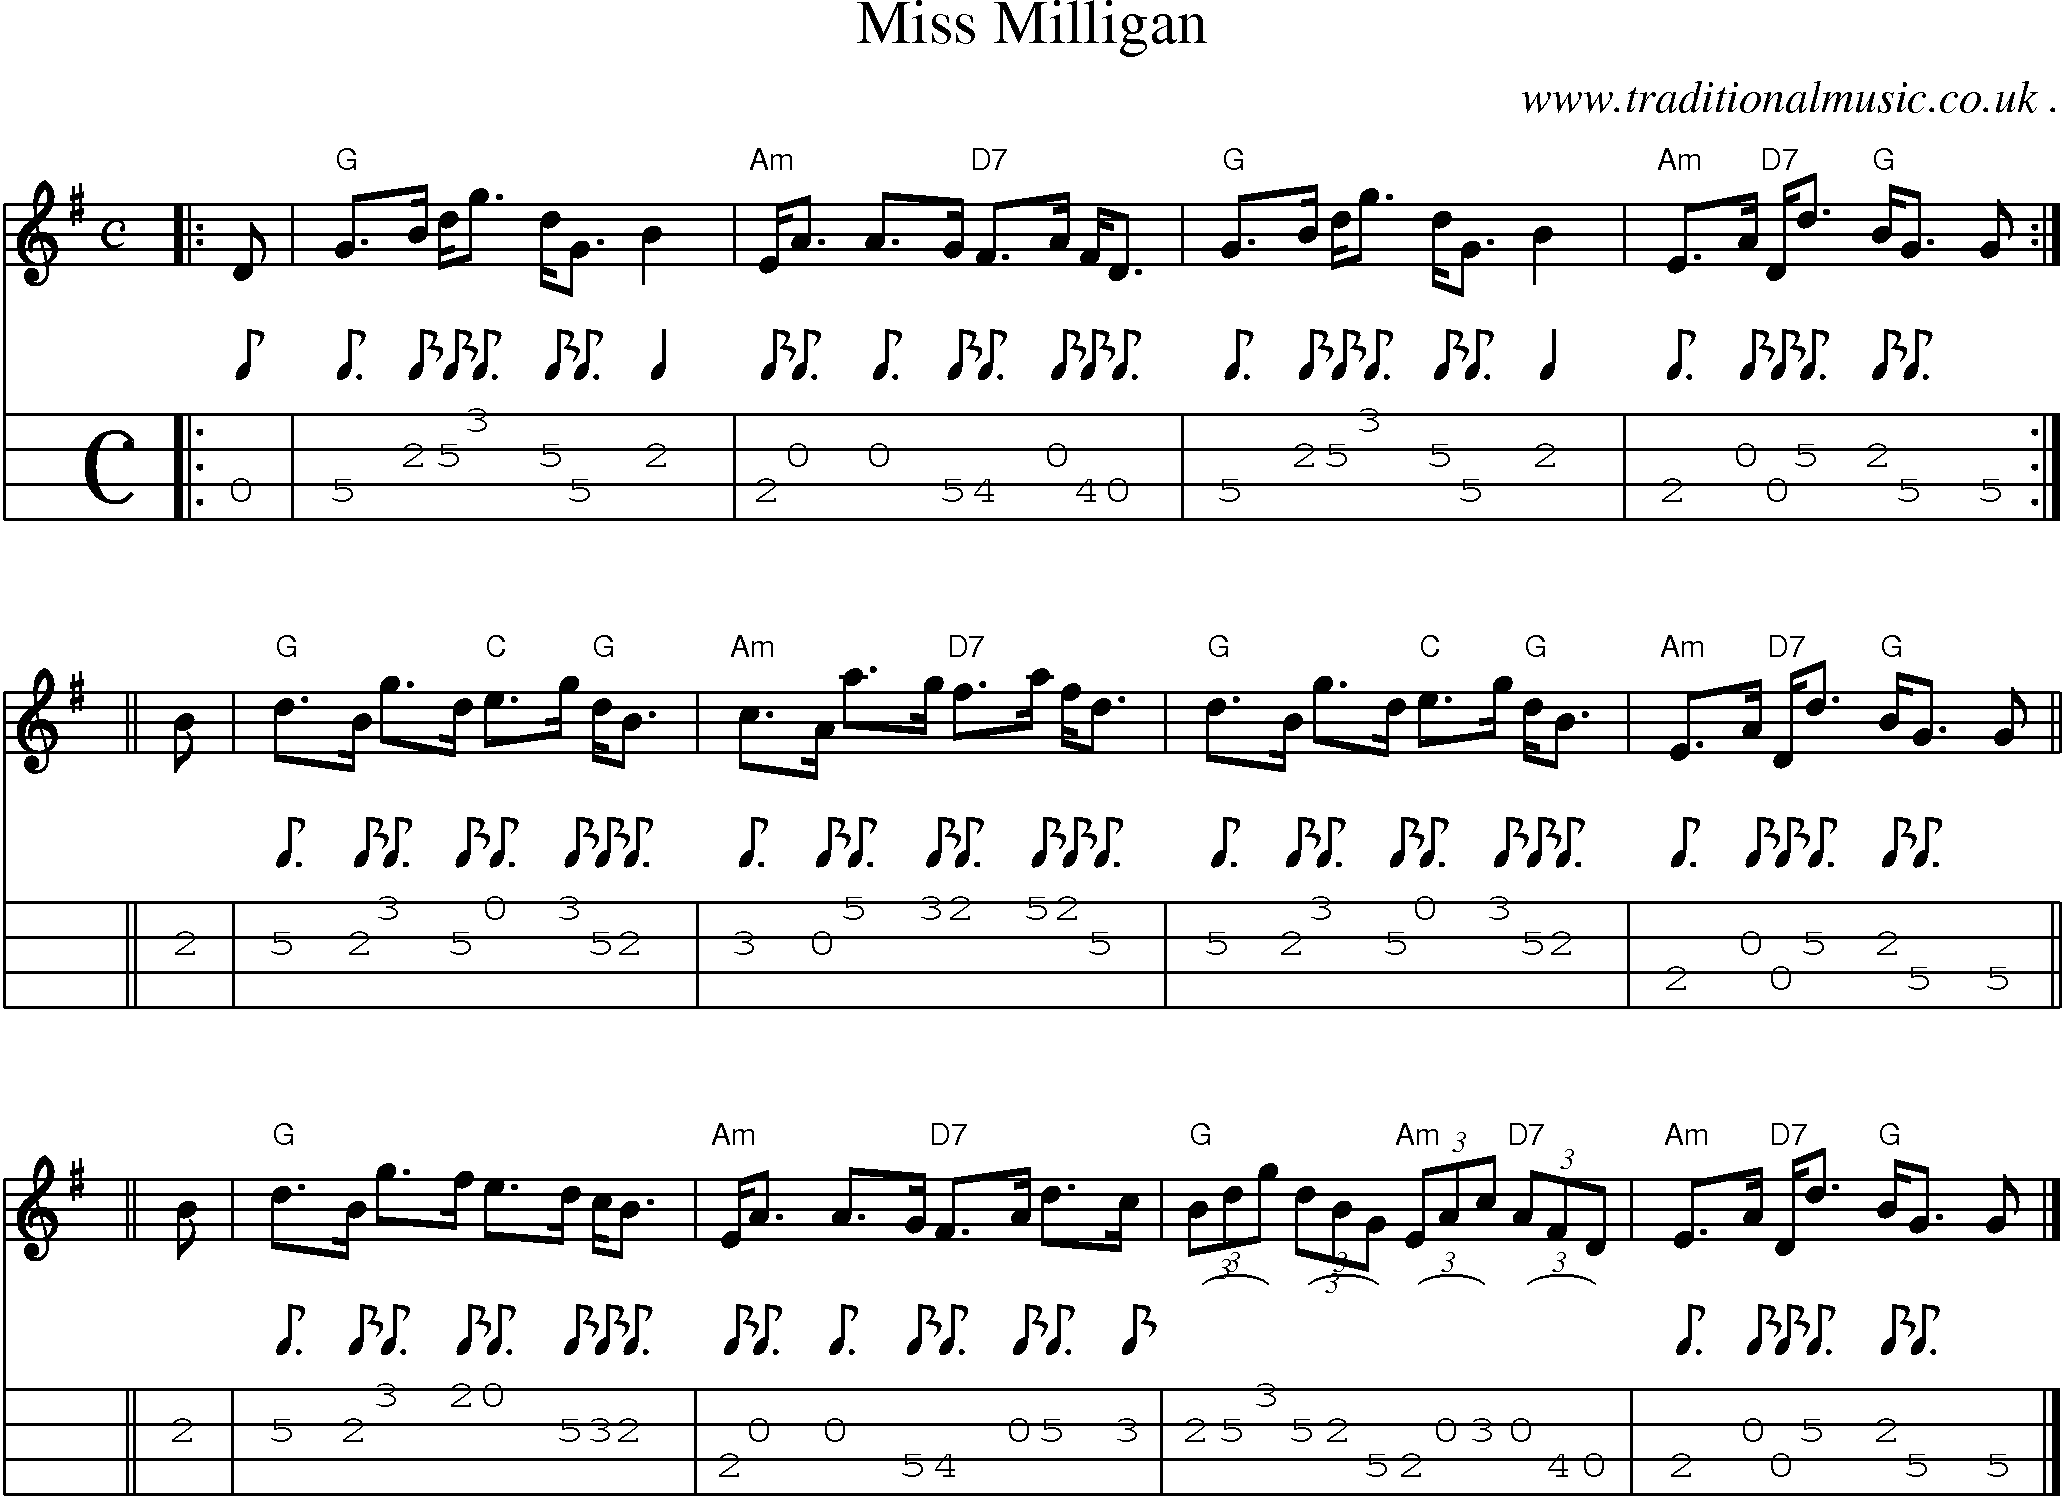 Sheet-music  score, Chords and Mandolin Tabs for Miss Milligan